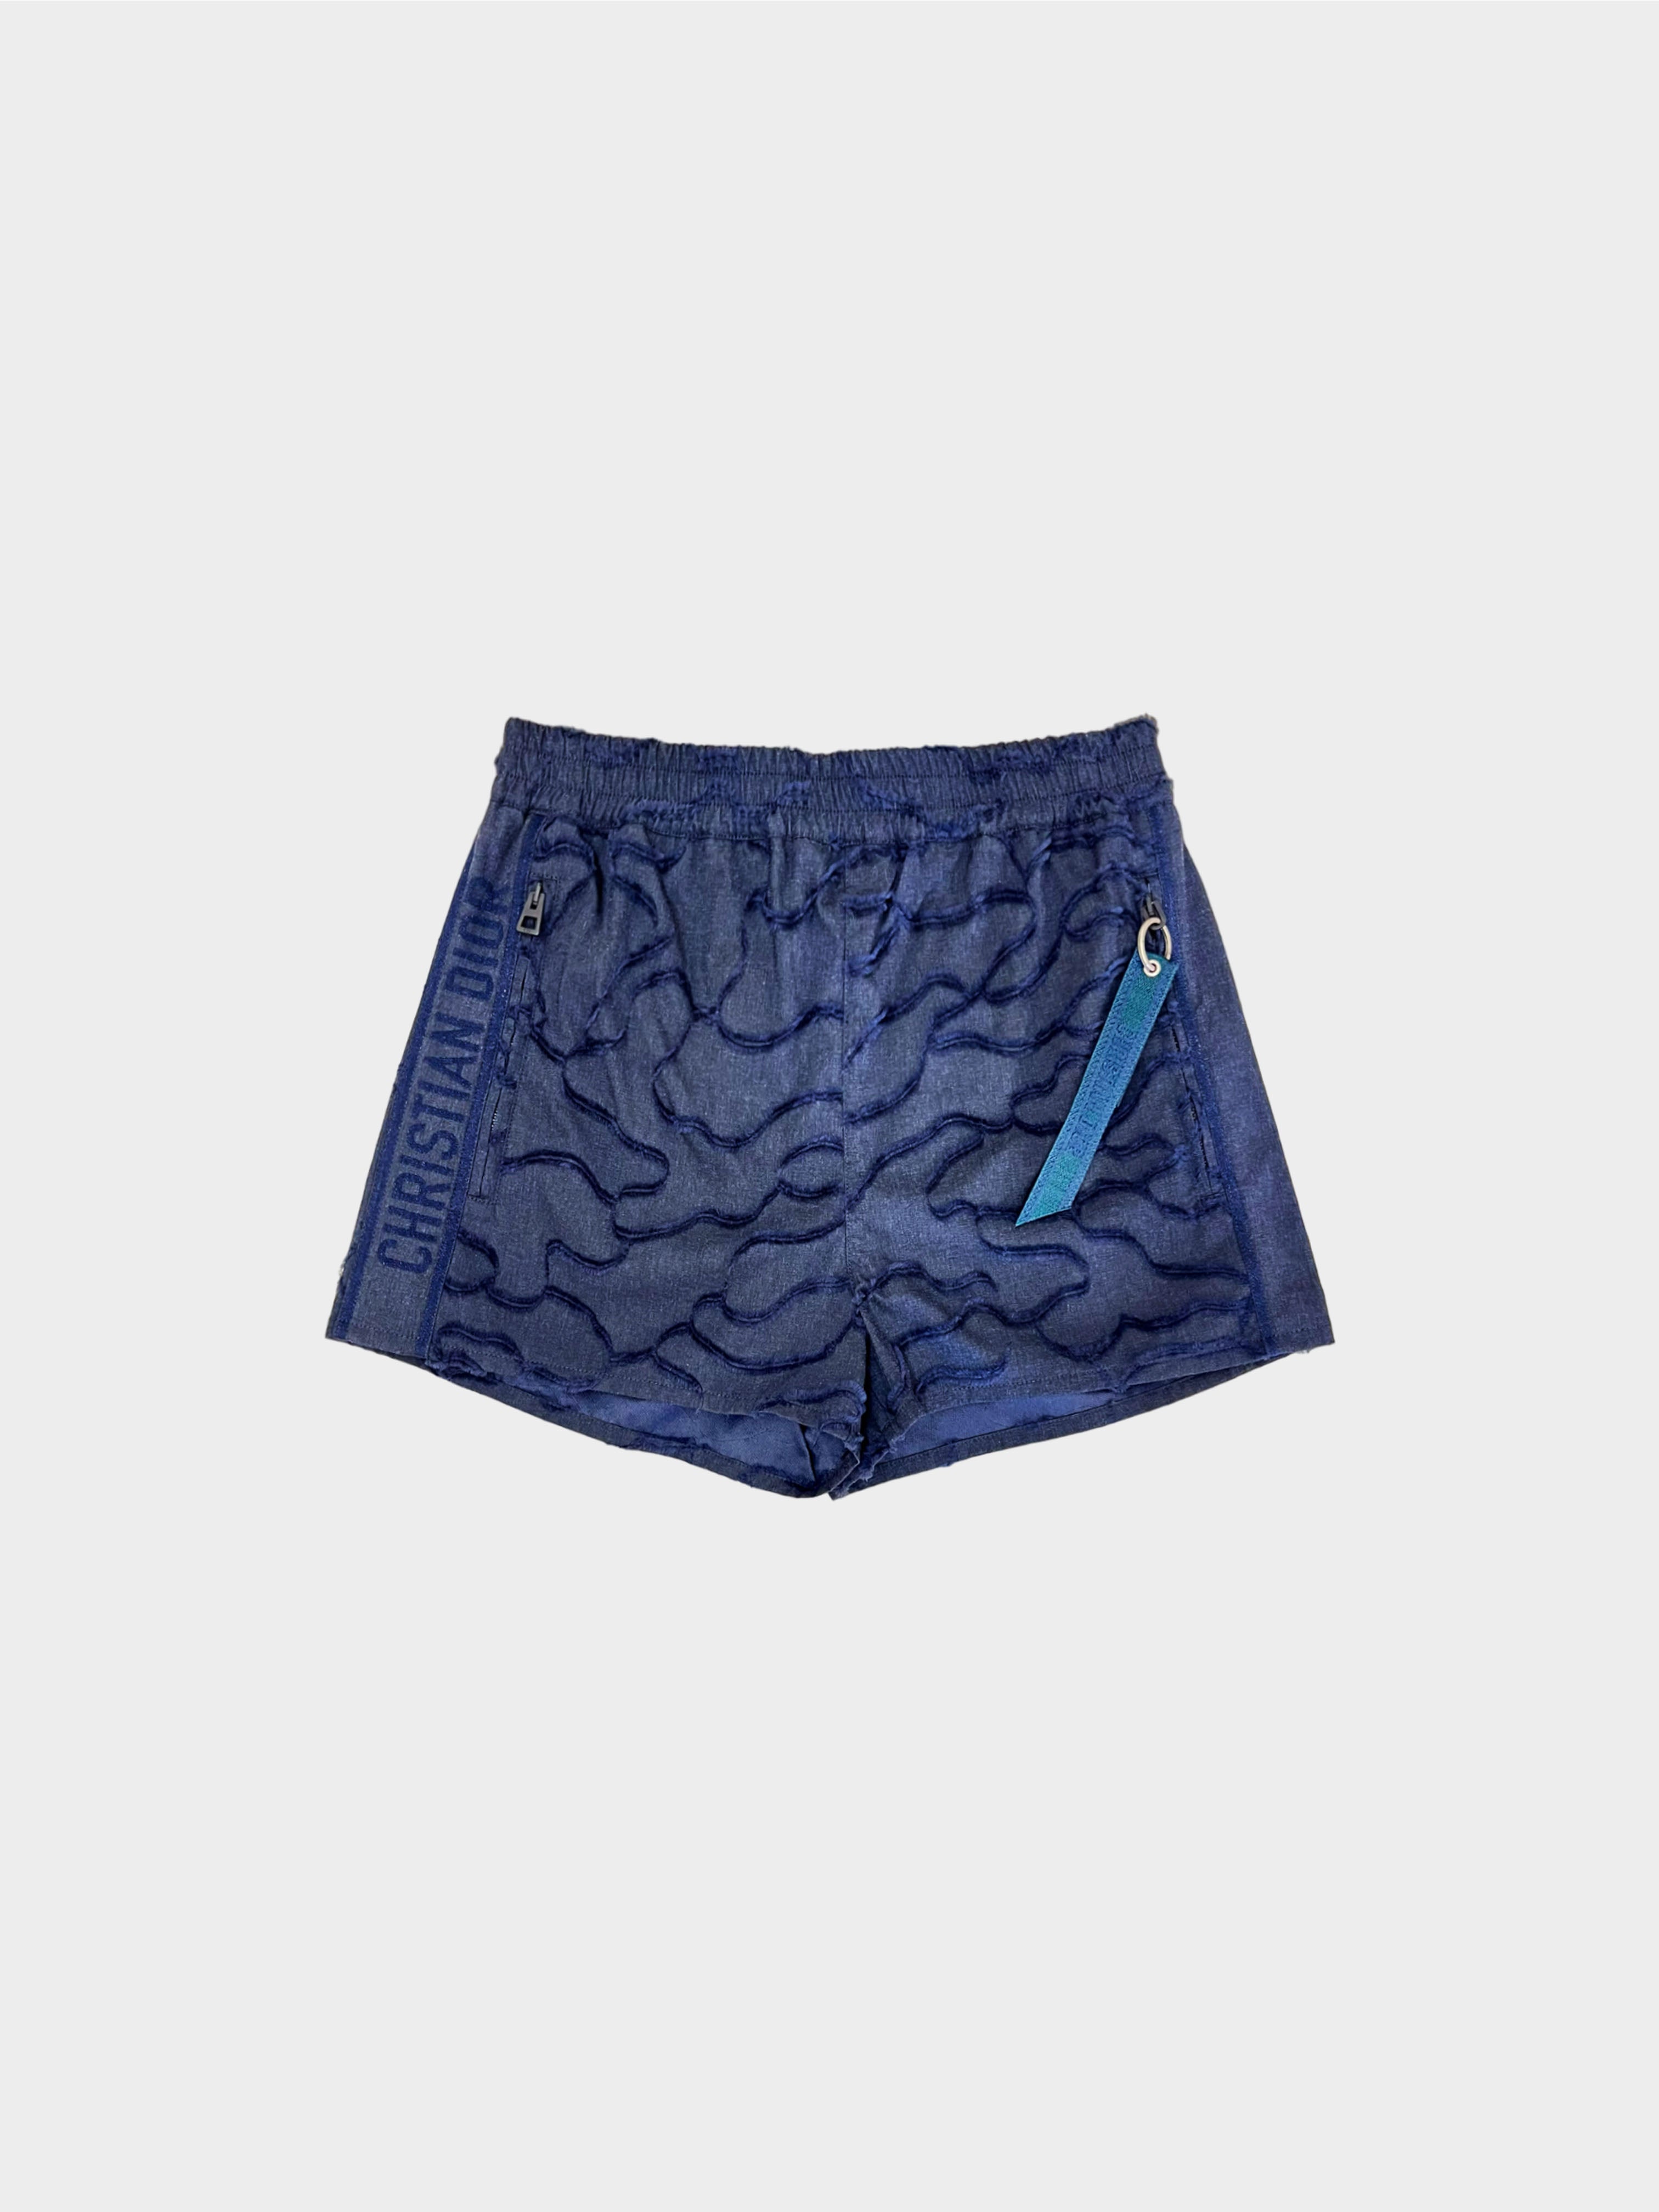 Christian Dior Cruise 2020 Navy Camouflage Cotton Shorts